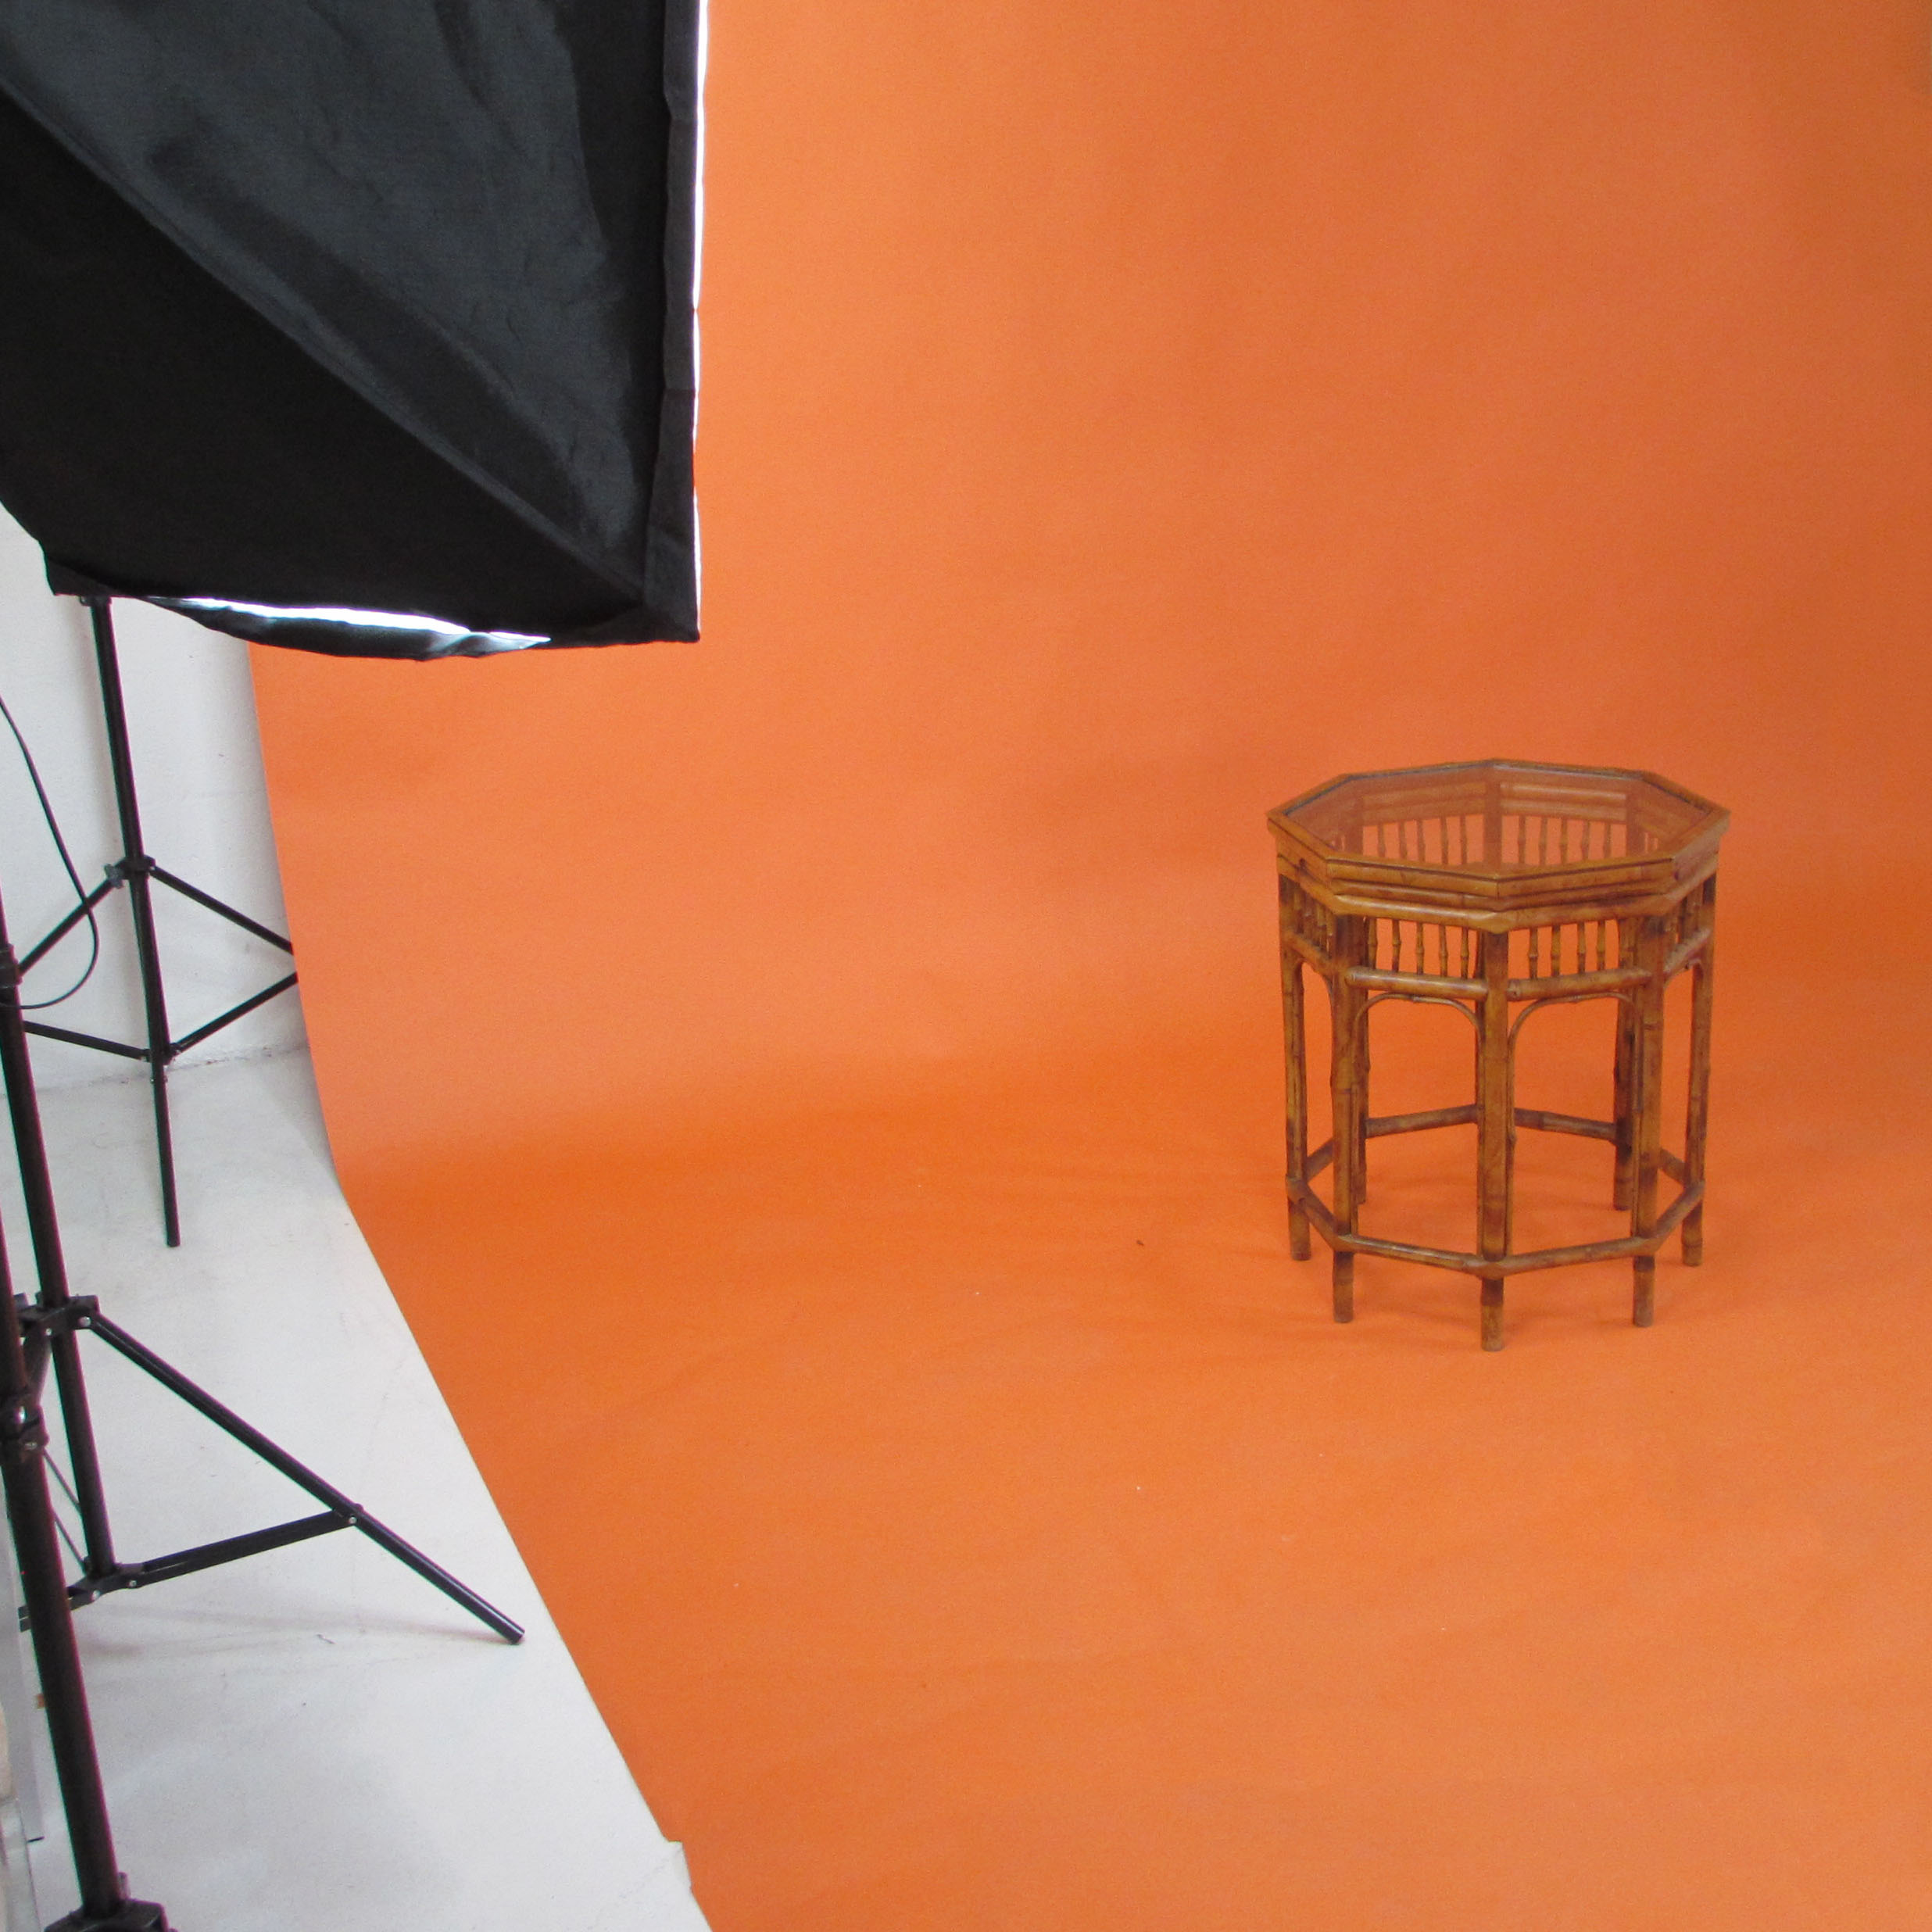 What is it like to be a furniture photographer?